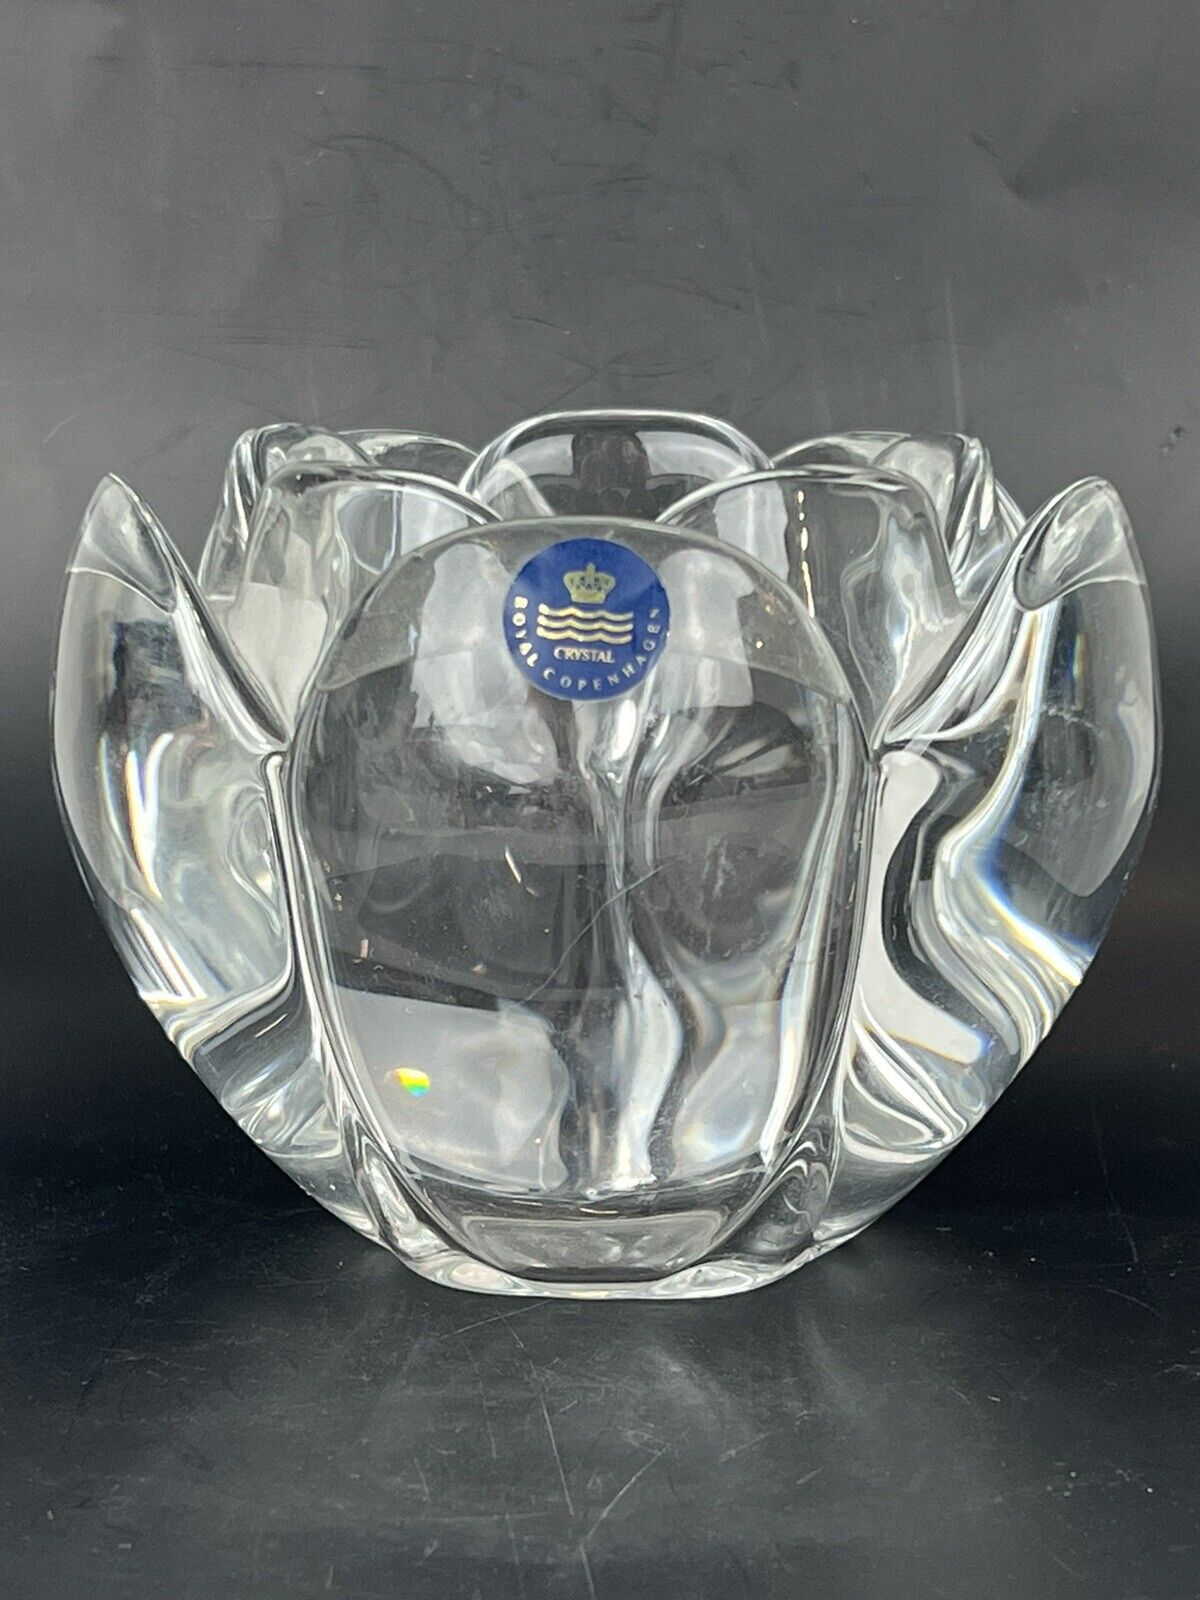 Royal Copenhagen Crystal Votive Lotus Clear Candle Holder with Label, 4x4x2.5 